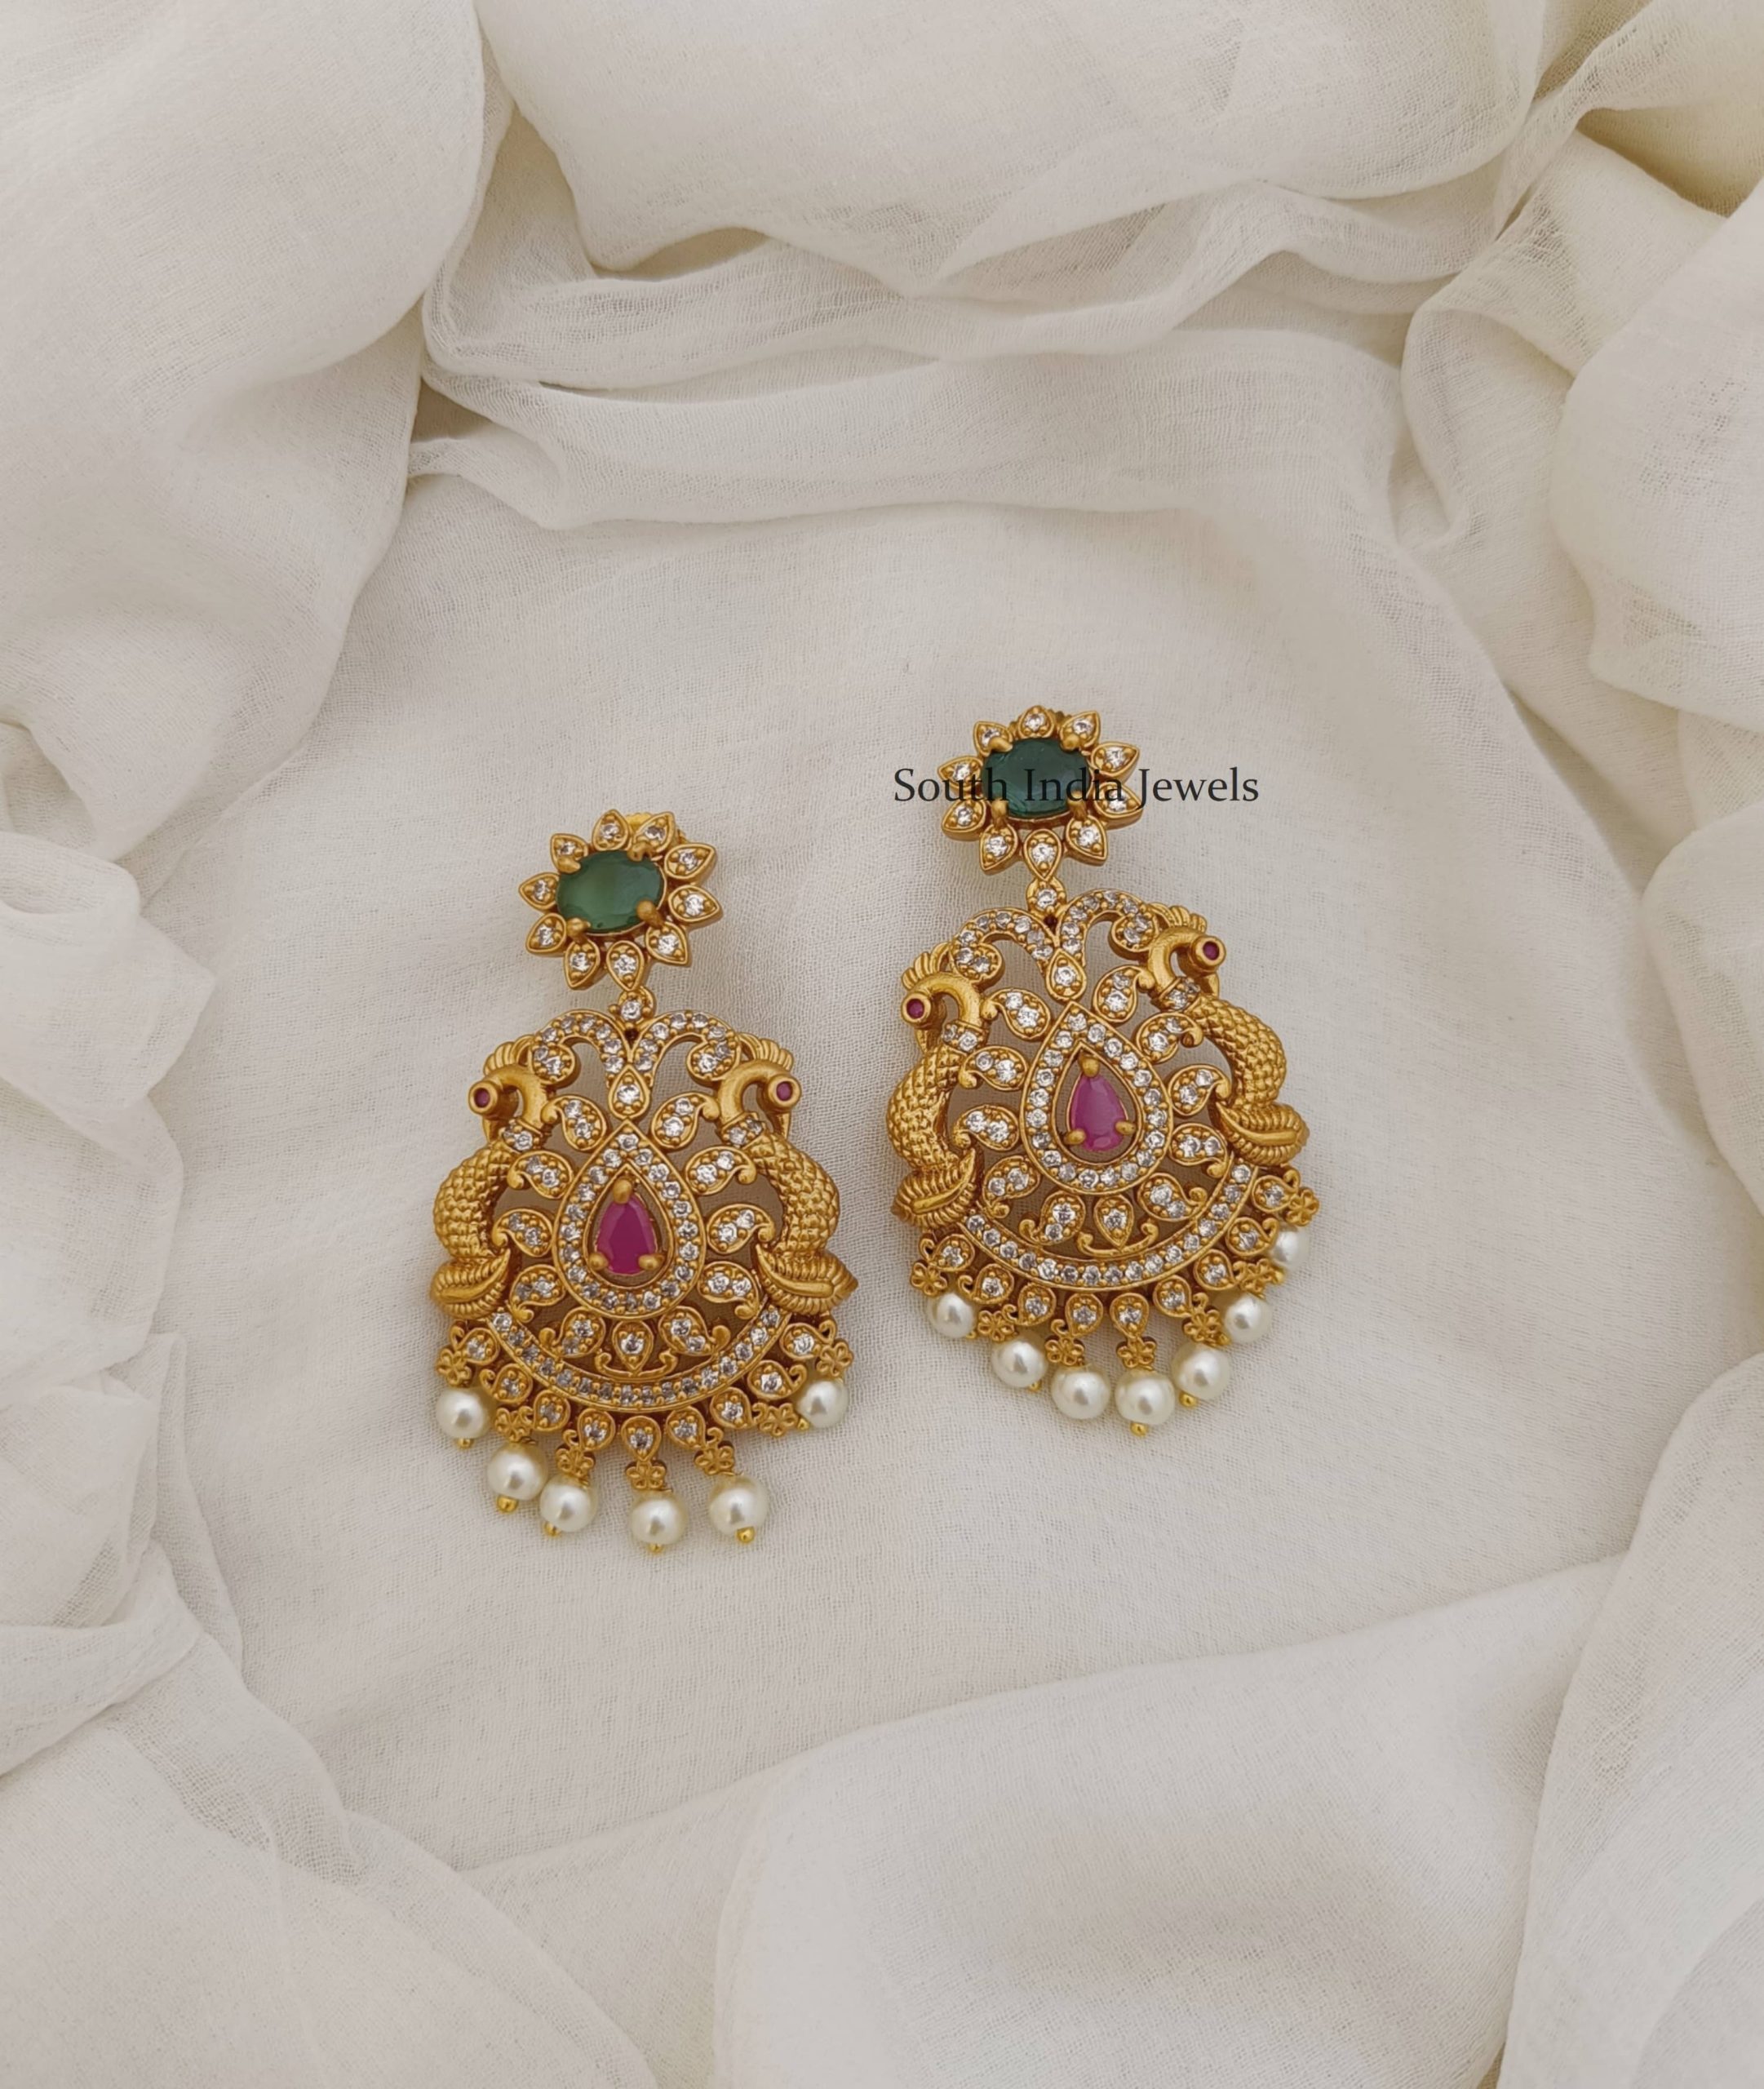 Peacock AD Stones Design Earrings- South India Jewels Online Stores.